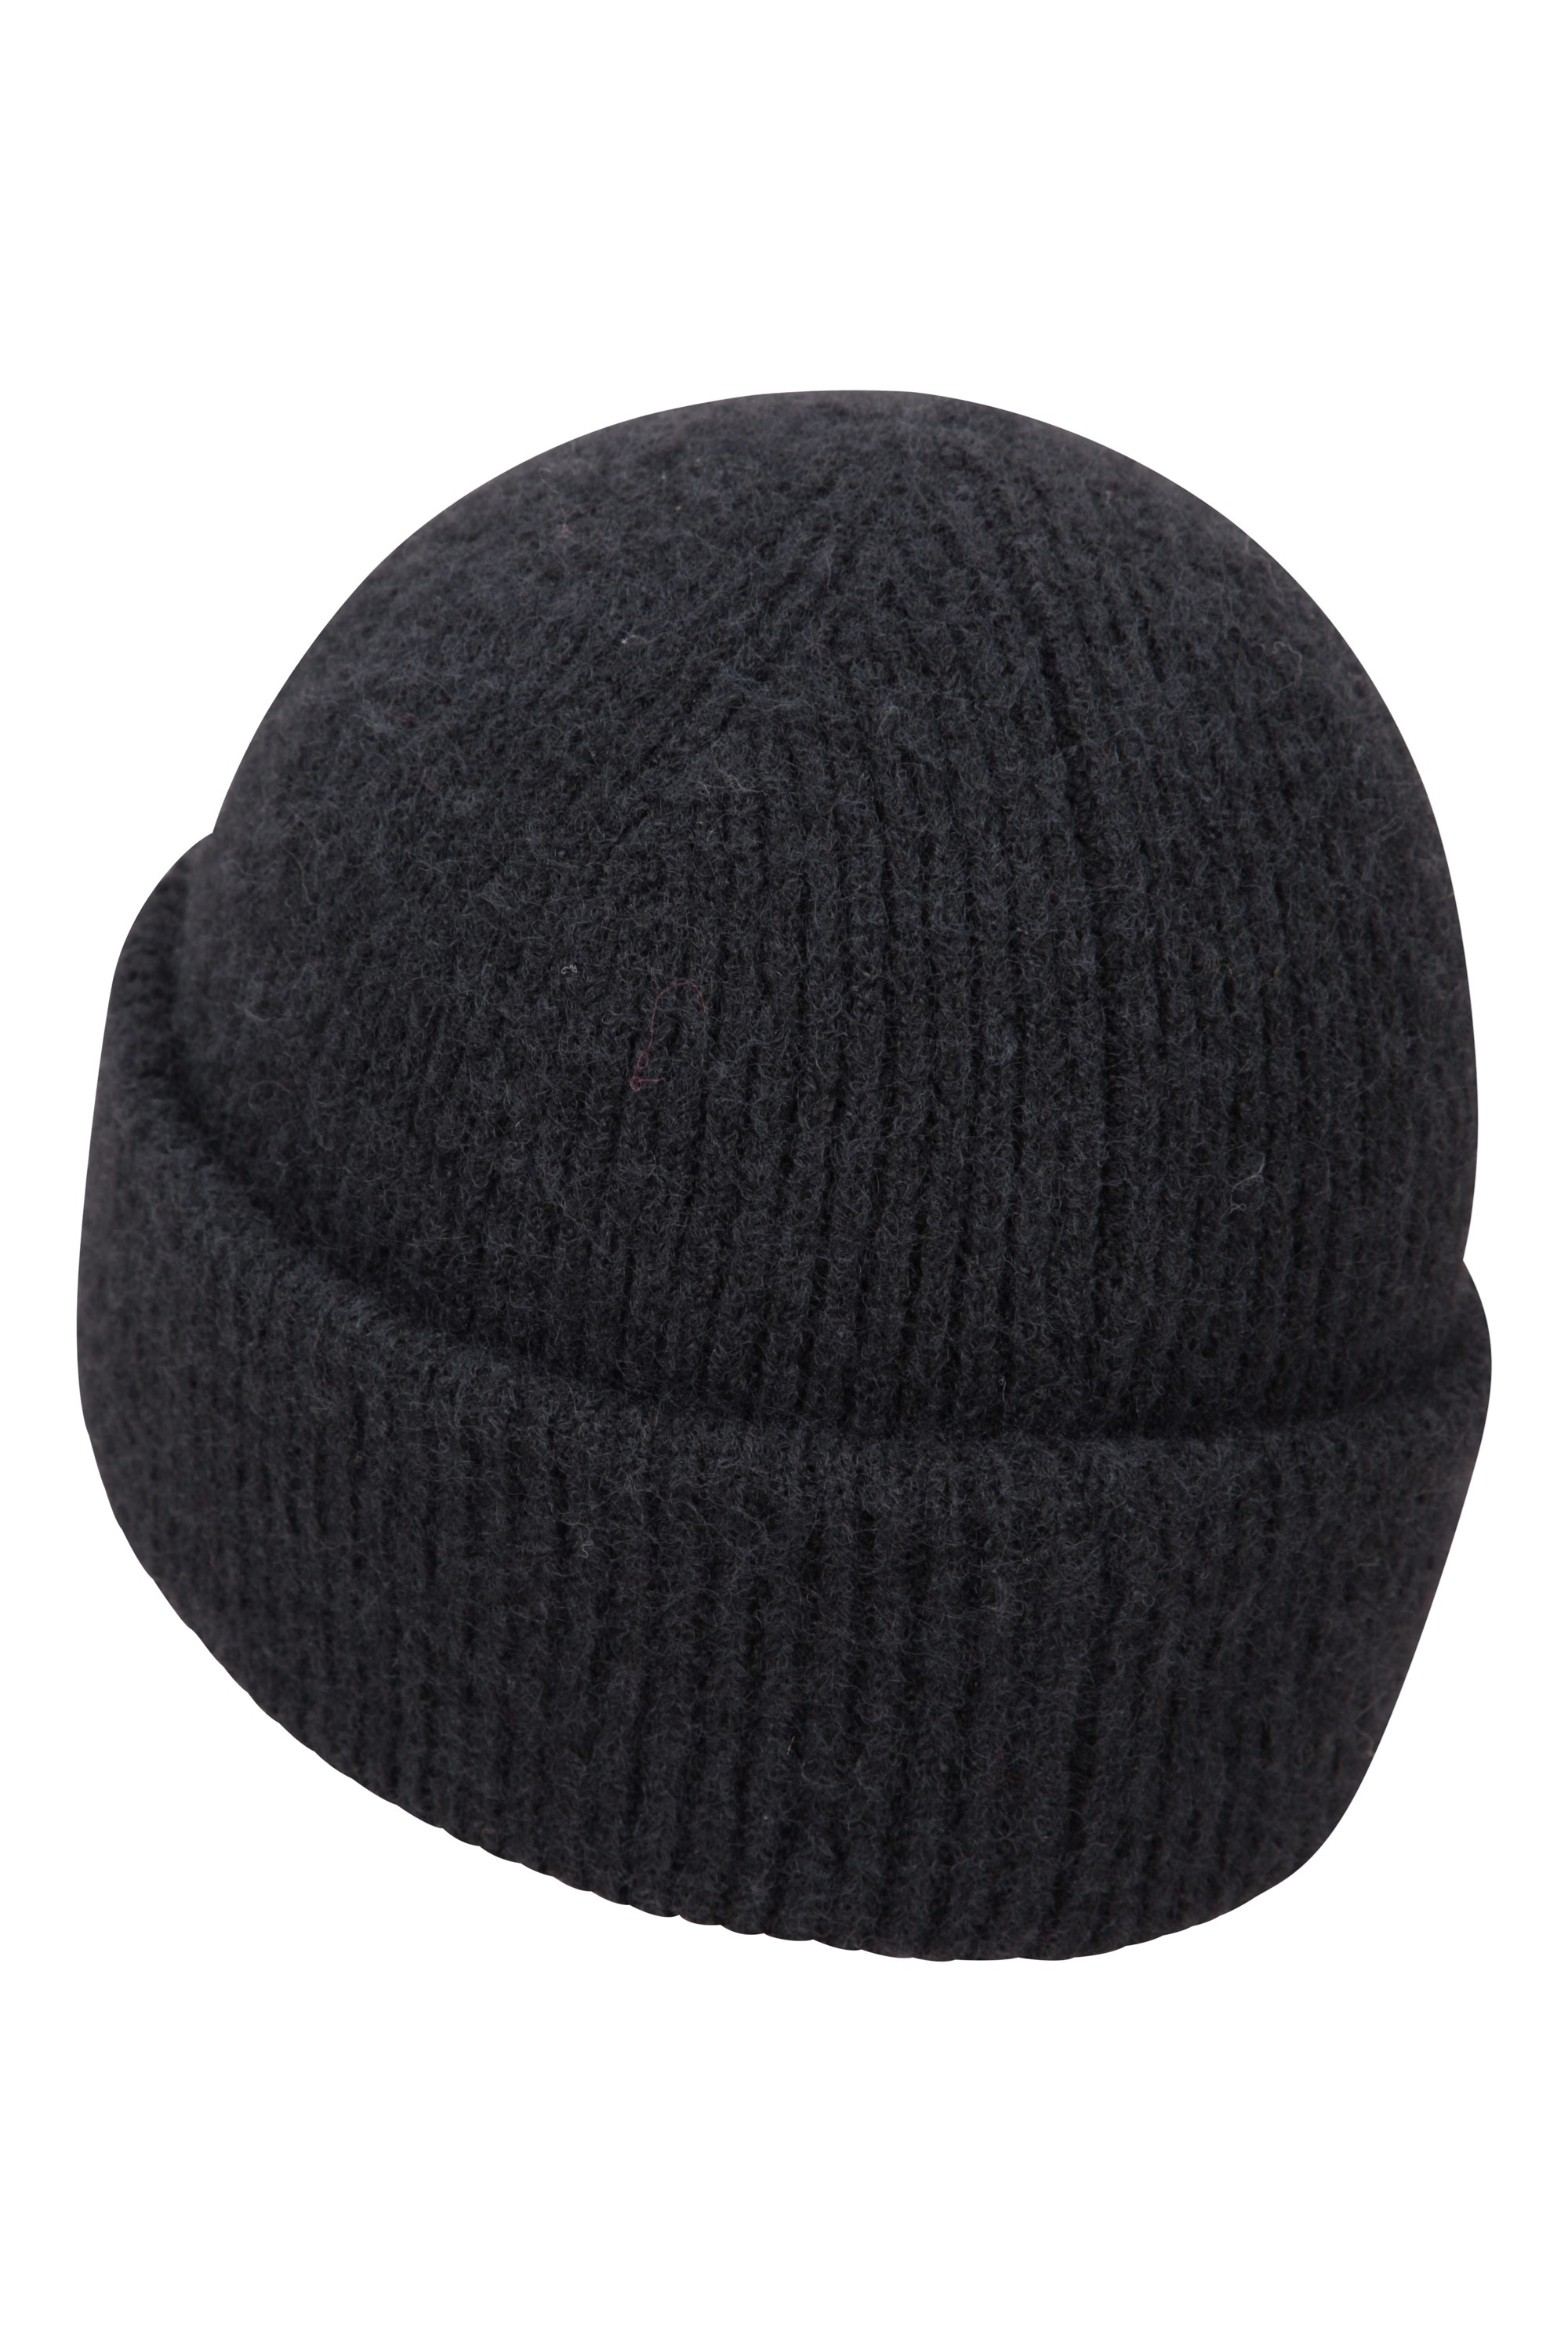 Heat Holders Mens Warm Fleece Lined Insulated Ribbed Knit Winter Thermal Hat 